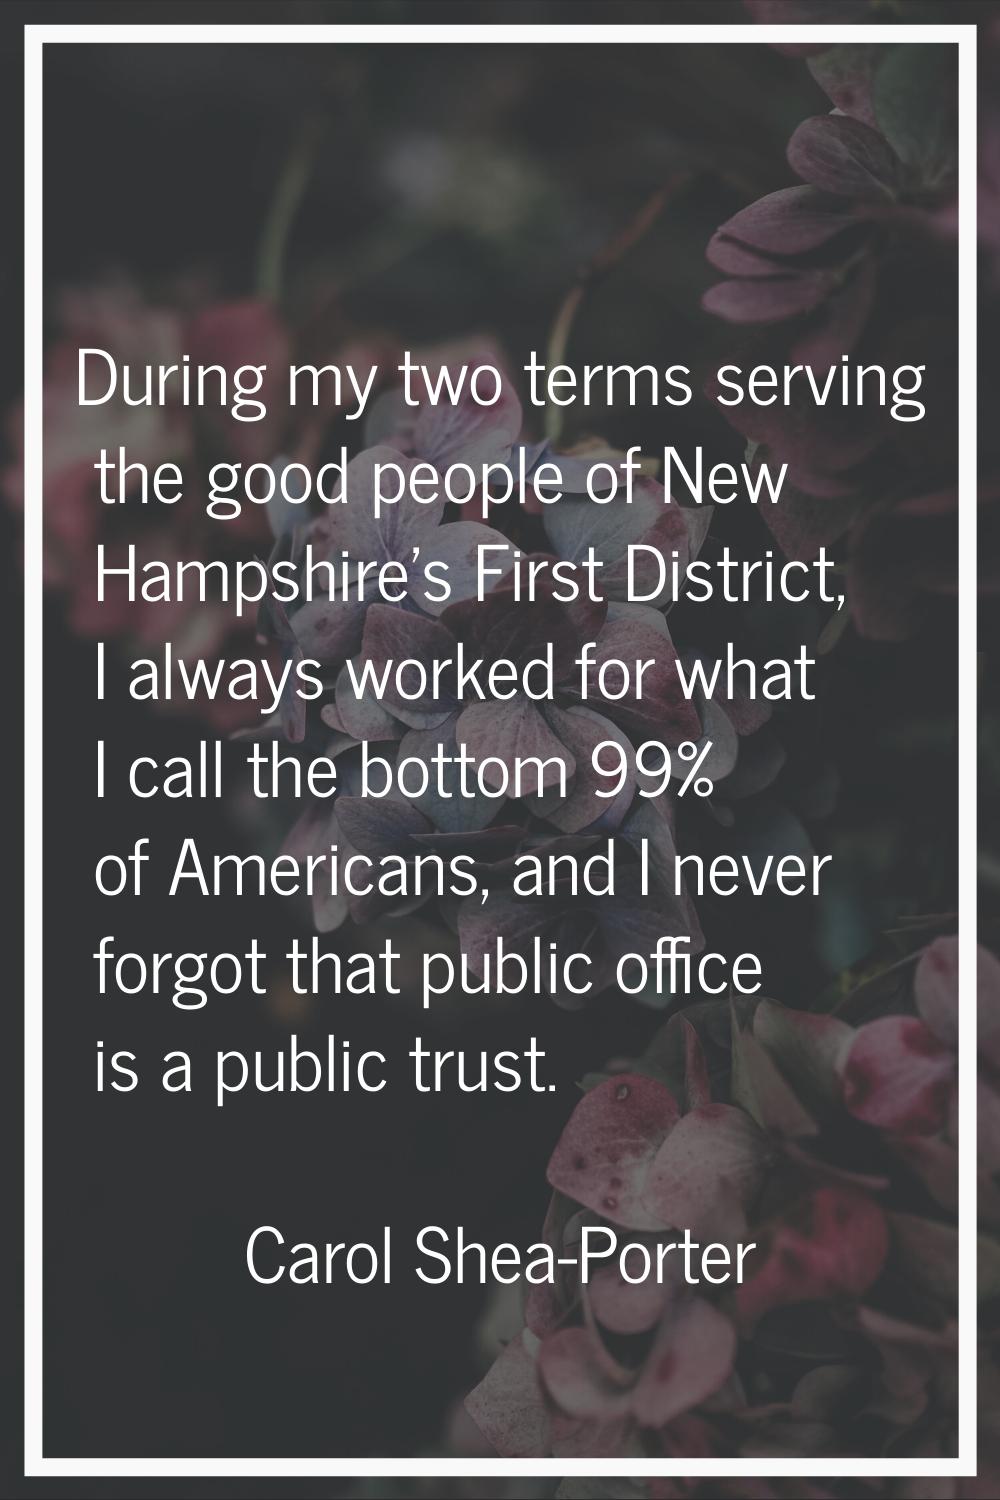 During my two terms serving the good people of New Hampshire's First District, I always worked for 